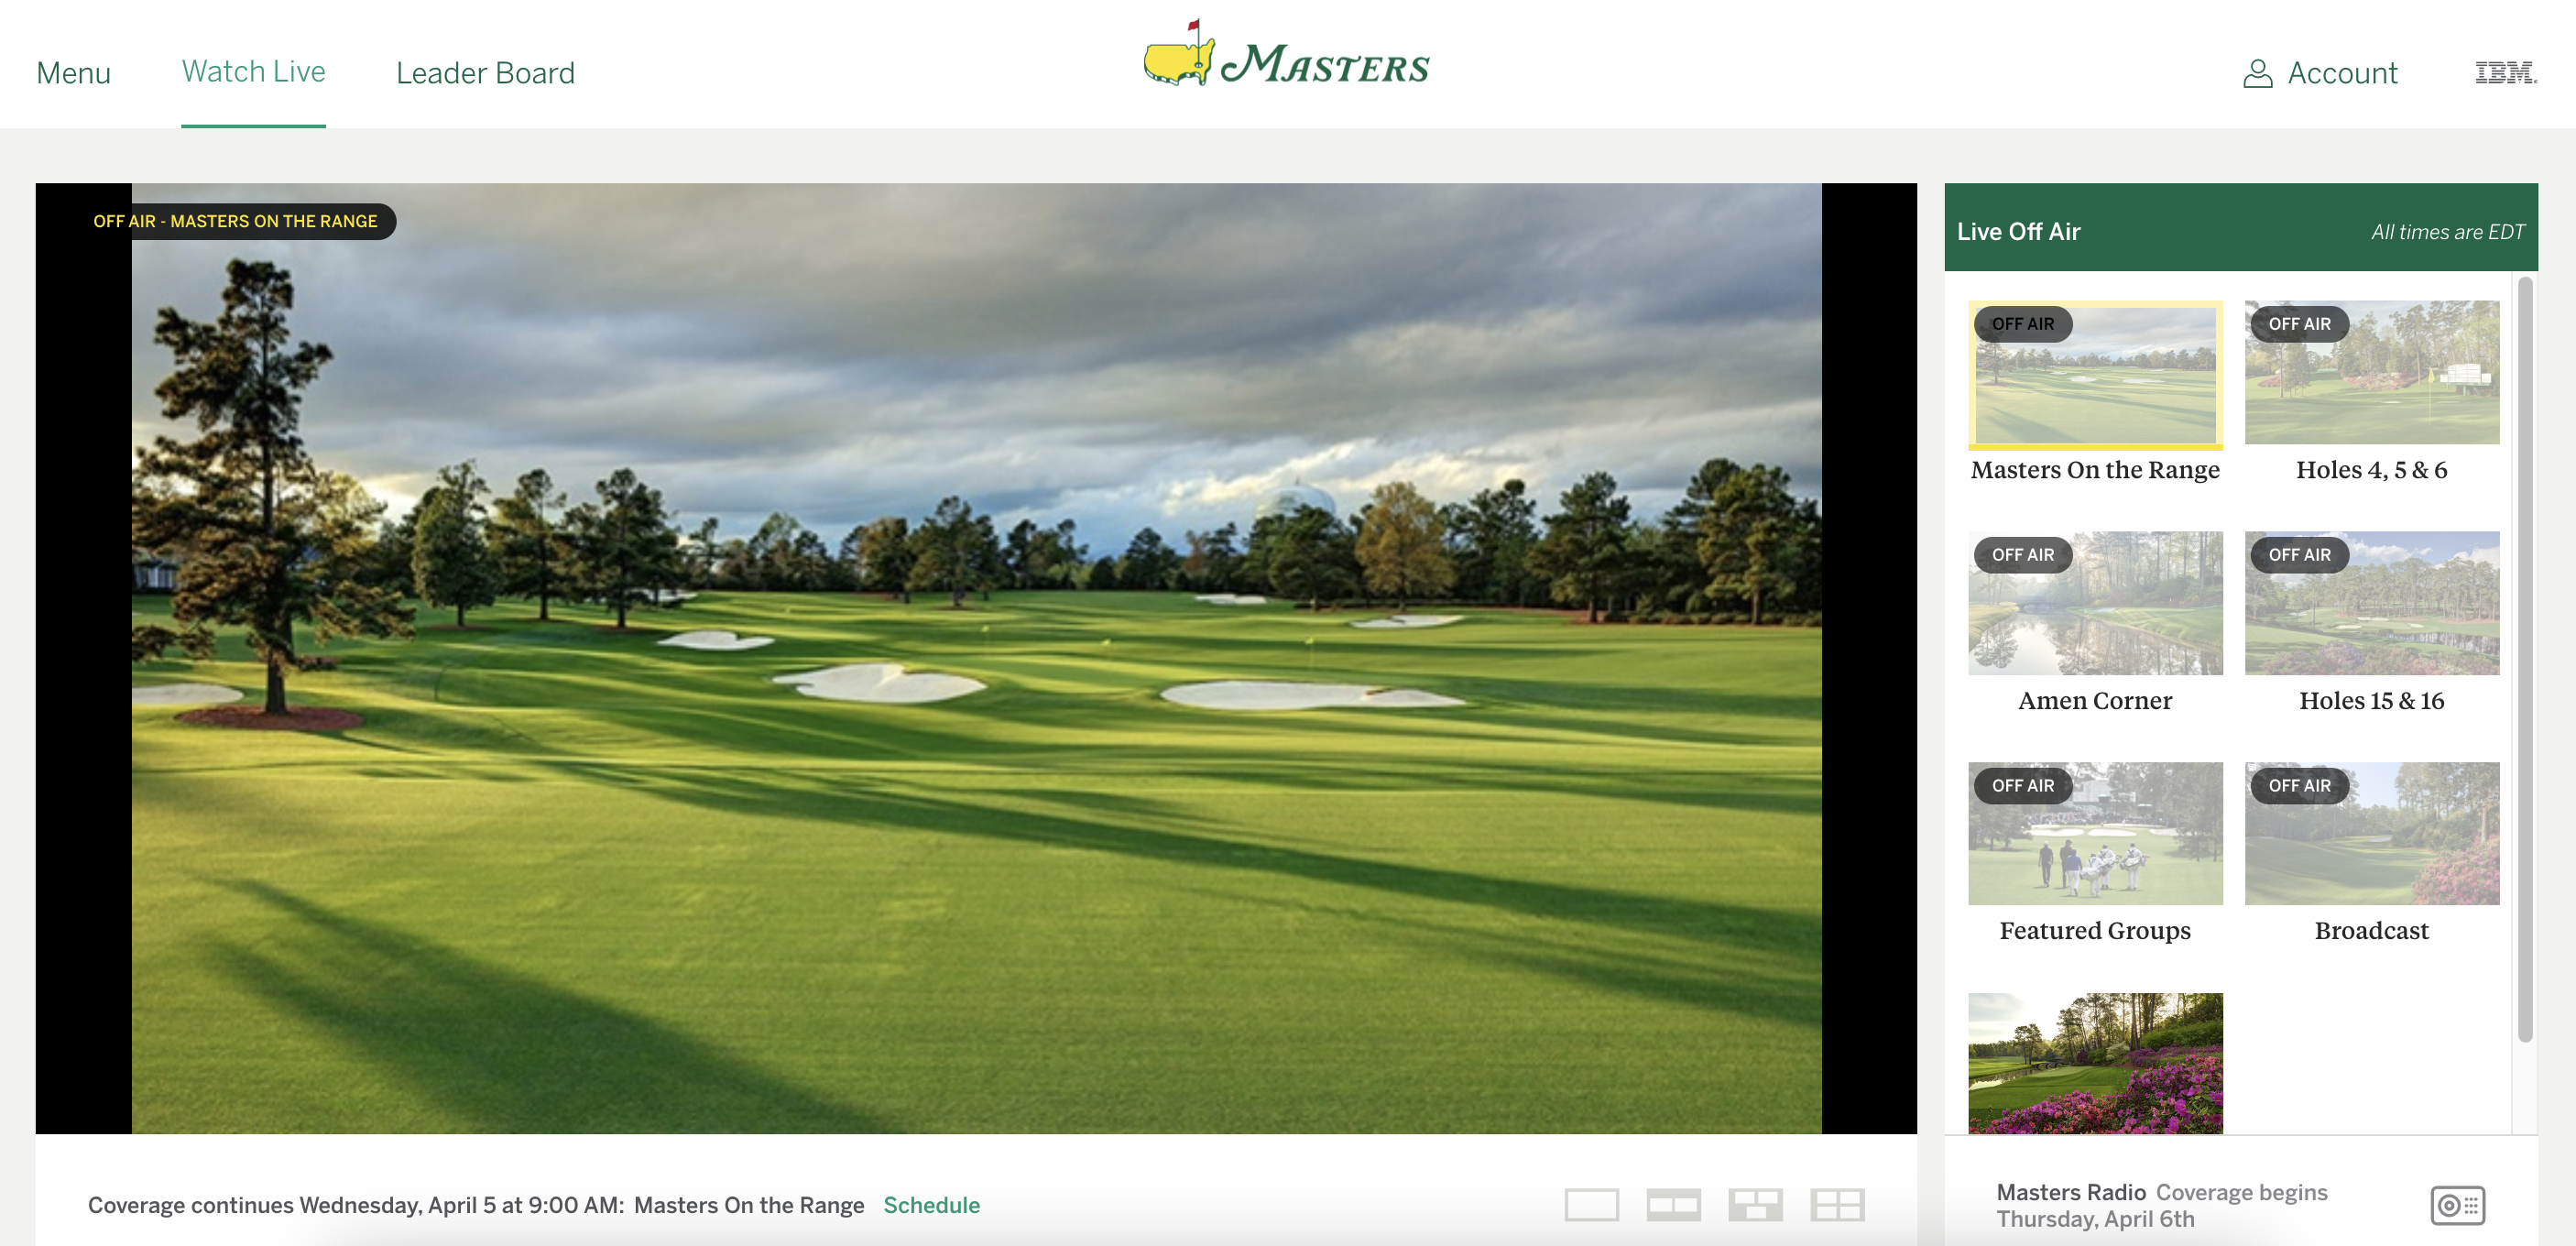 Users can also visit The Masters website on any web browser and live stream any sporting event they prefer.